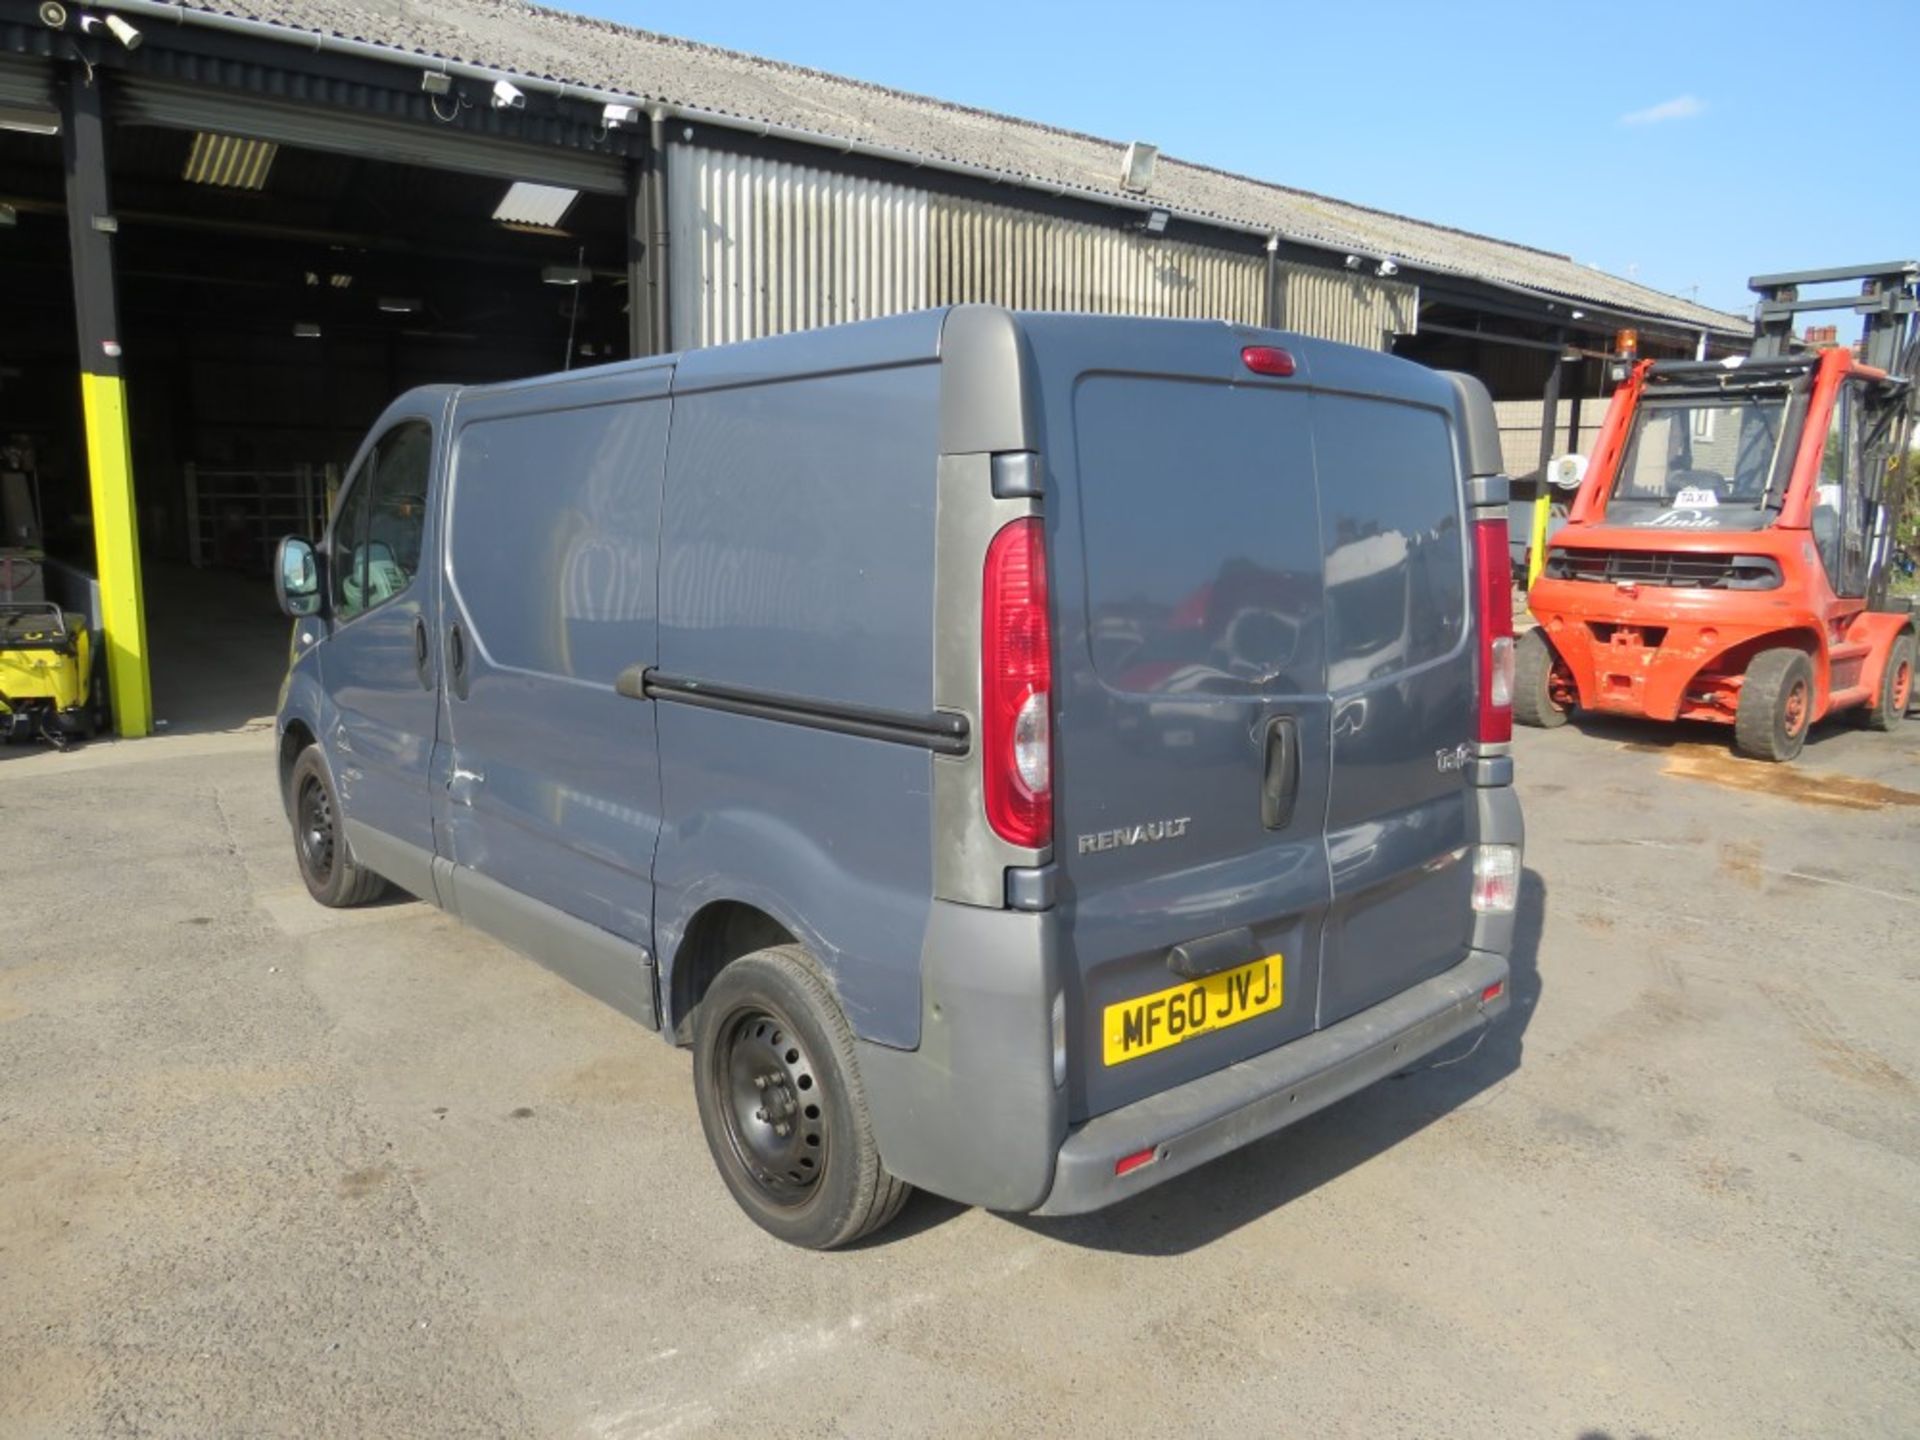 60 reg RENAULT TRAFIC SL27 DCI 115, 1ST REG 09/10, 180327M NOT WARRANTED, V5 HERE, 1 OWNER FROM - Image 3 of 7